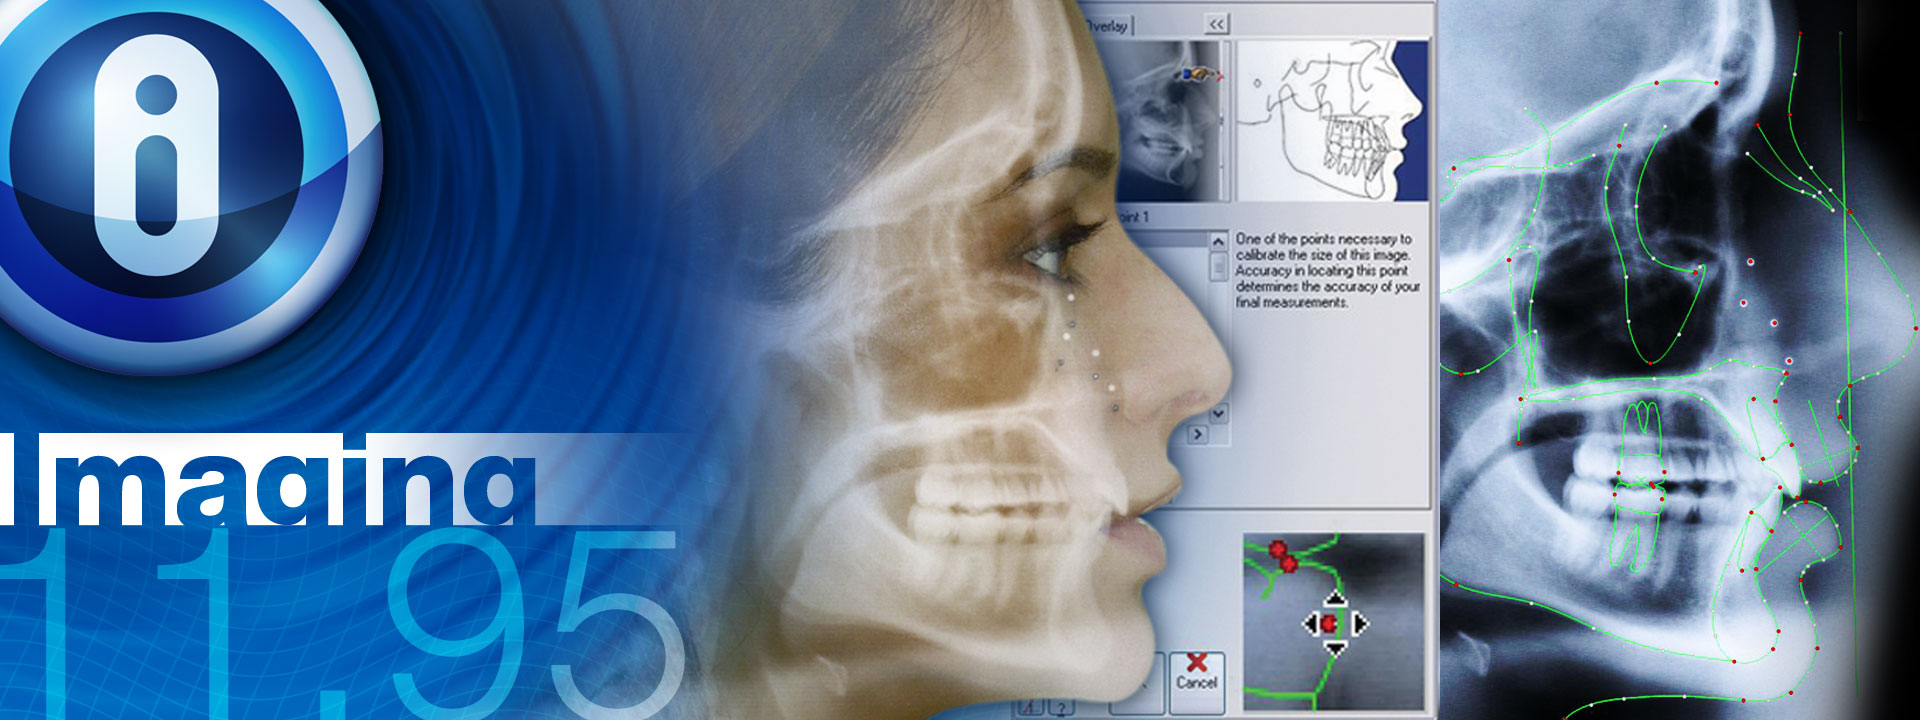 Dolphin Ceph Tracing allows you to analyze cephalometric radiographs and create progress superimpositions quickly and accurately. Utilized by thousands of practices and researchers throughout the world.